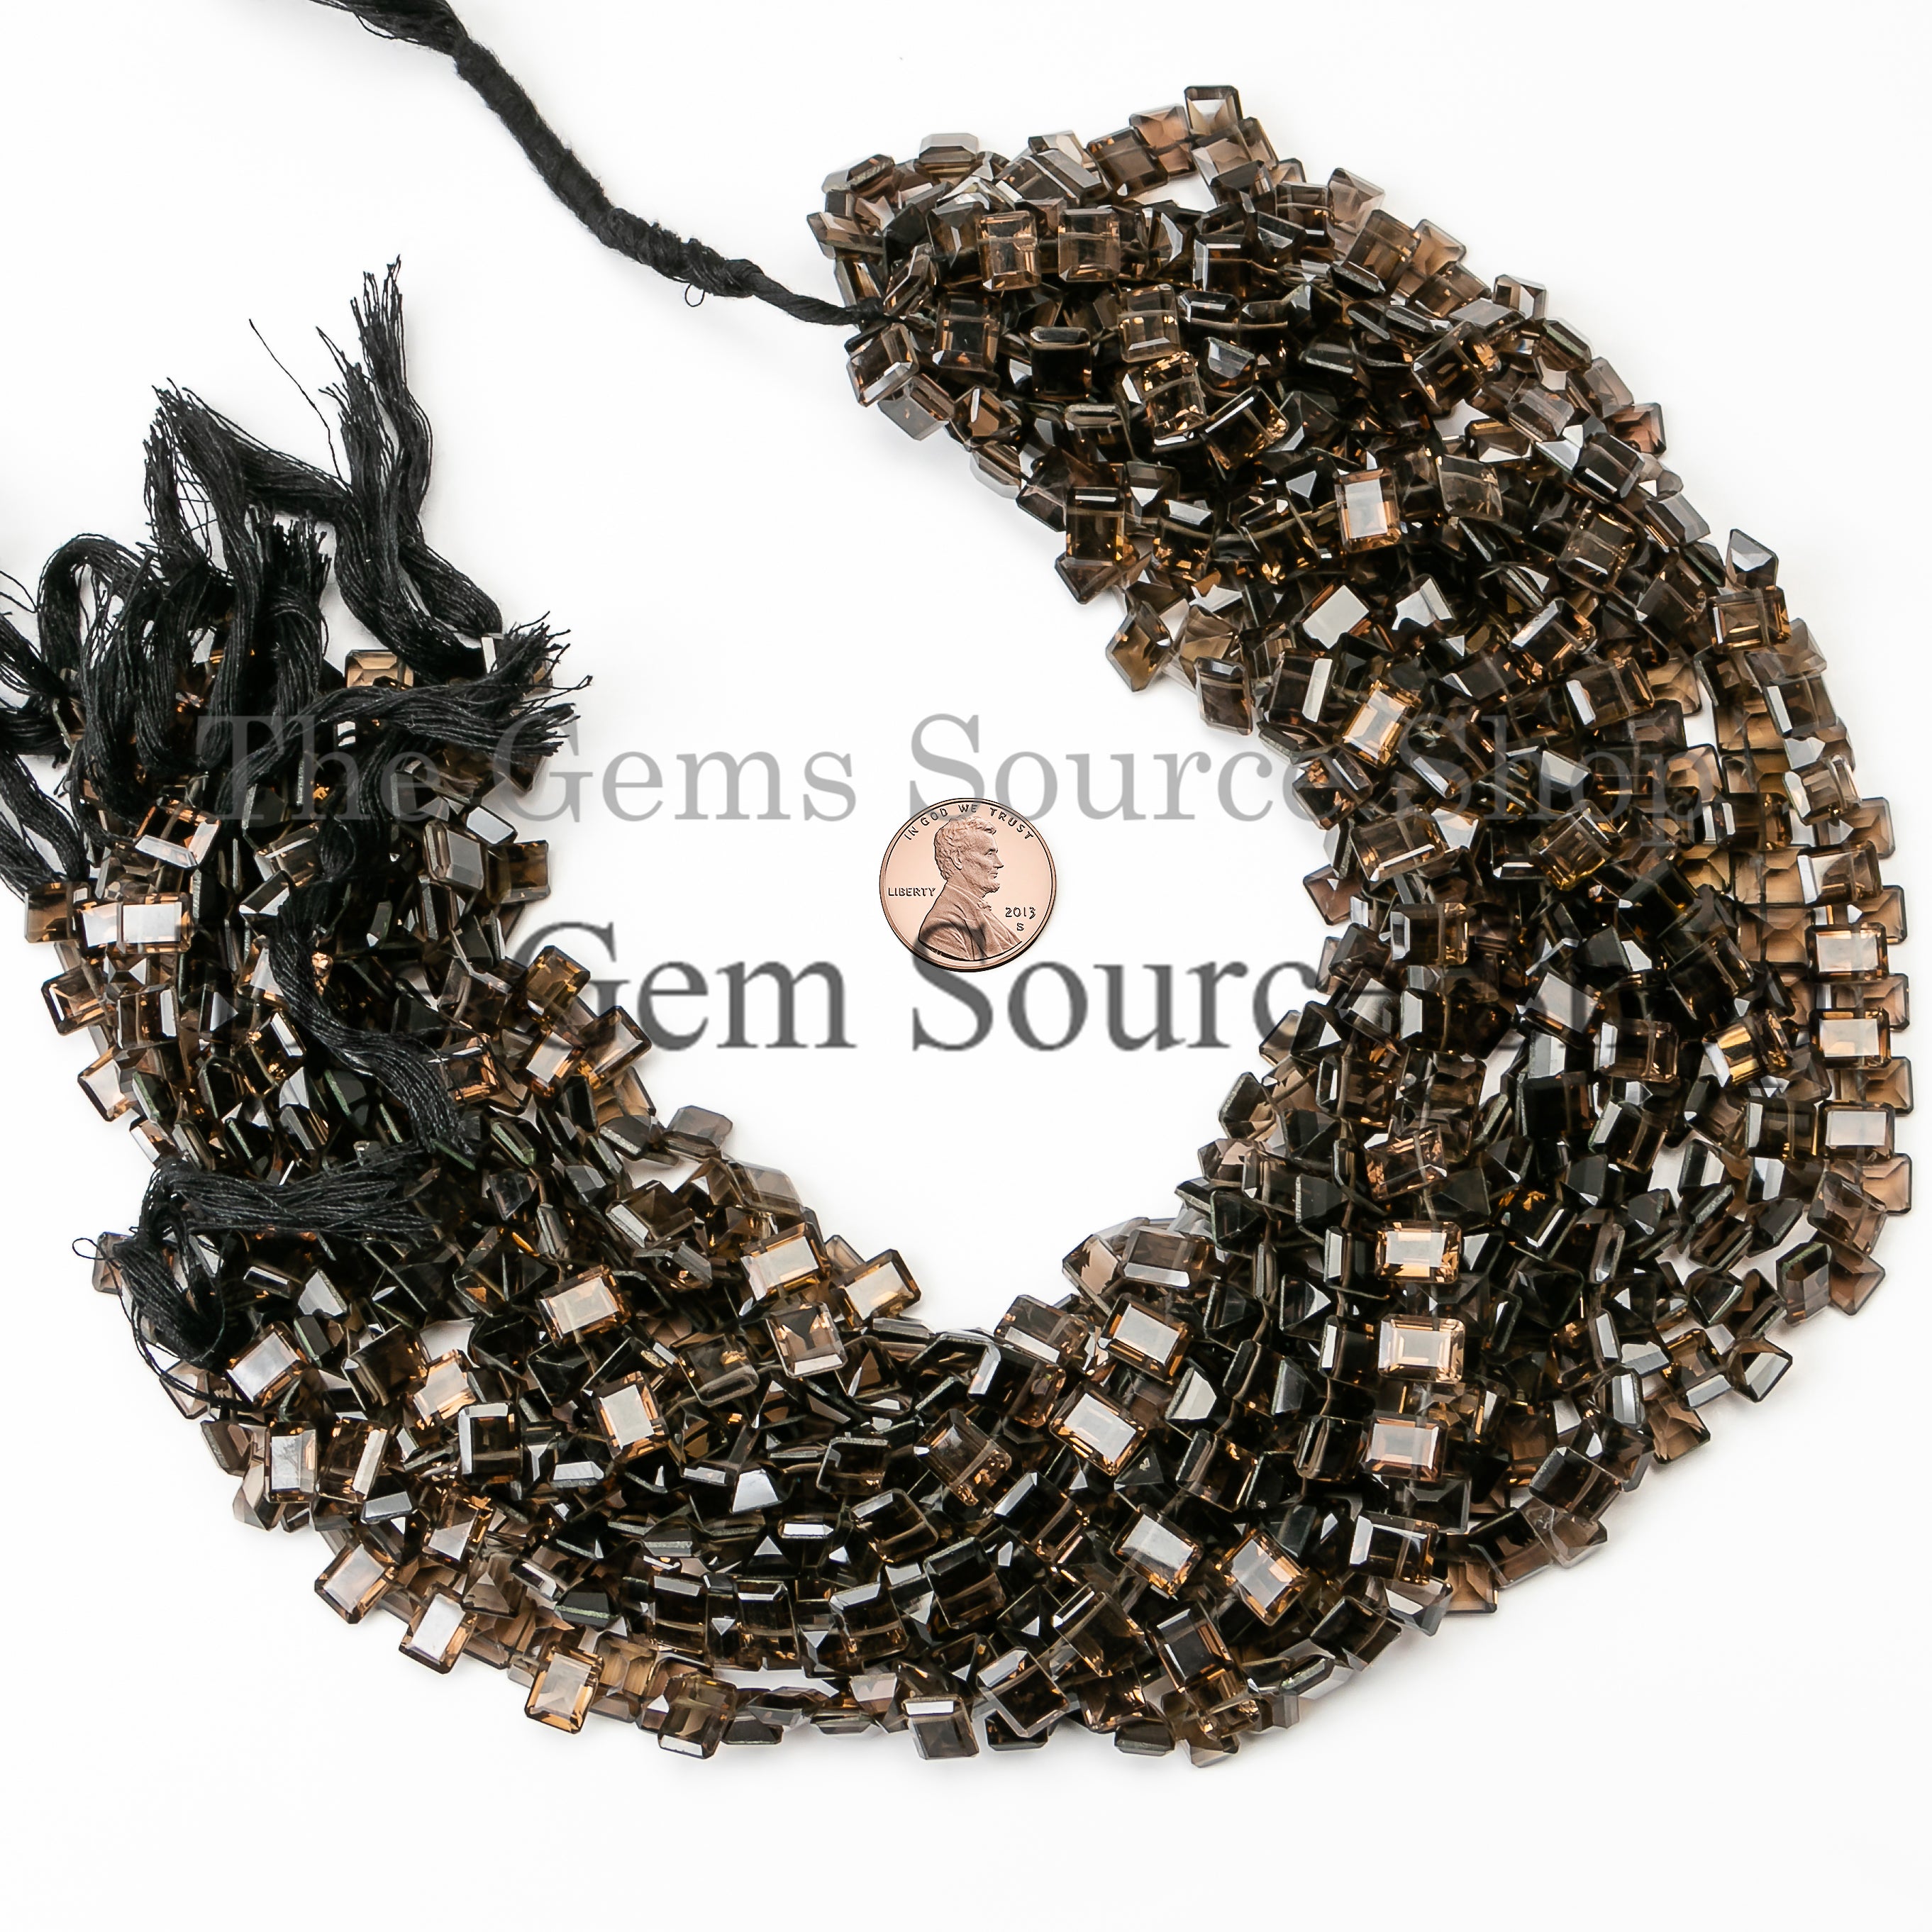 AA Quality Smoky Quartz Faceted Briolette Cut Cushion Shape Beads, Smoky Quartz Beads, Smoky Quartz, Jewelry Making Wholesale Beads